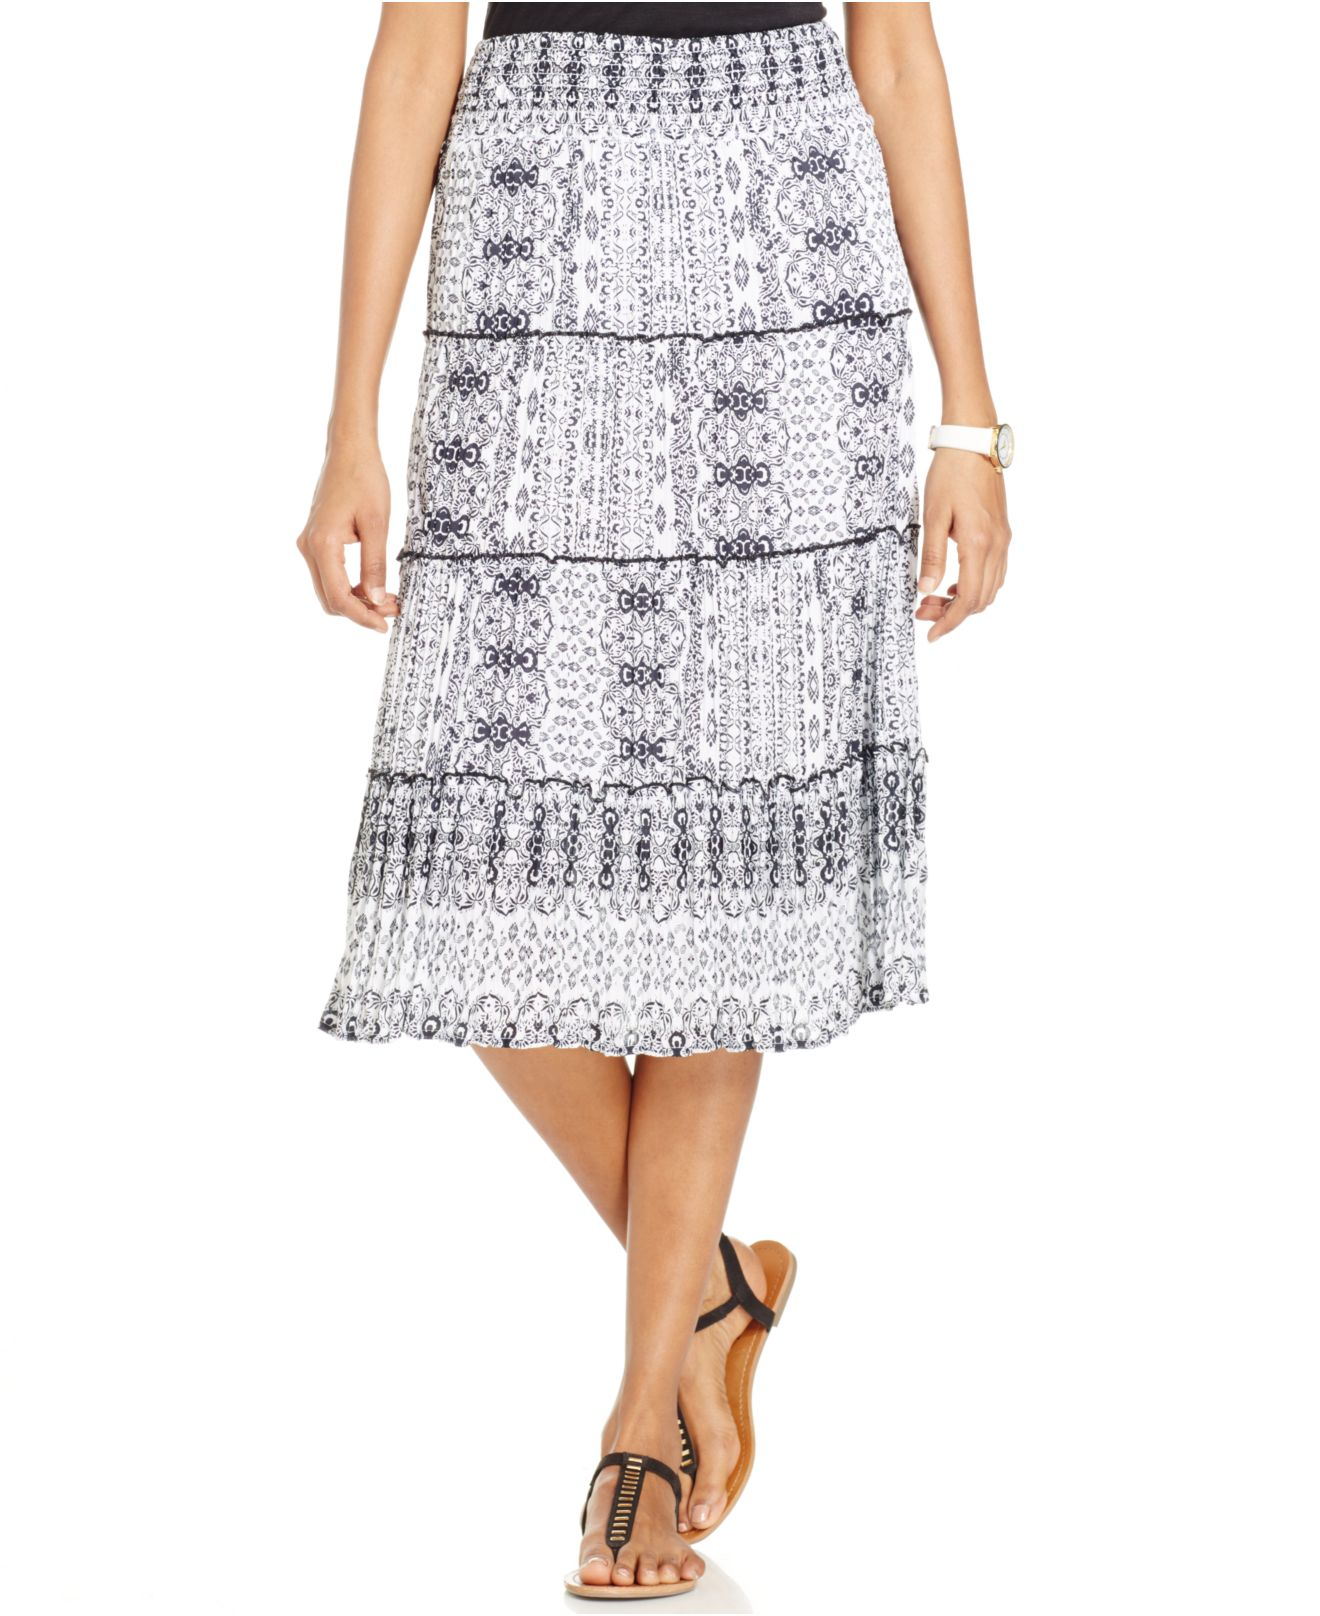 Lyst - Style & co. Petite Printed Tiered A-line Skirt in Black